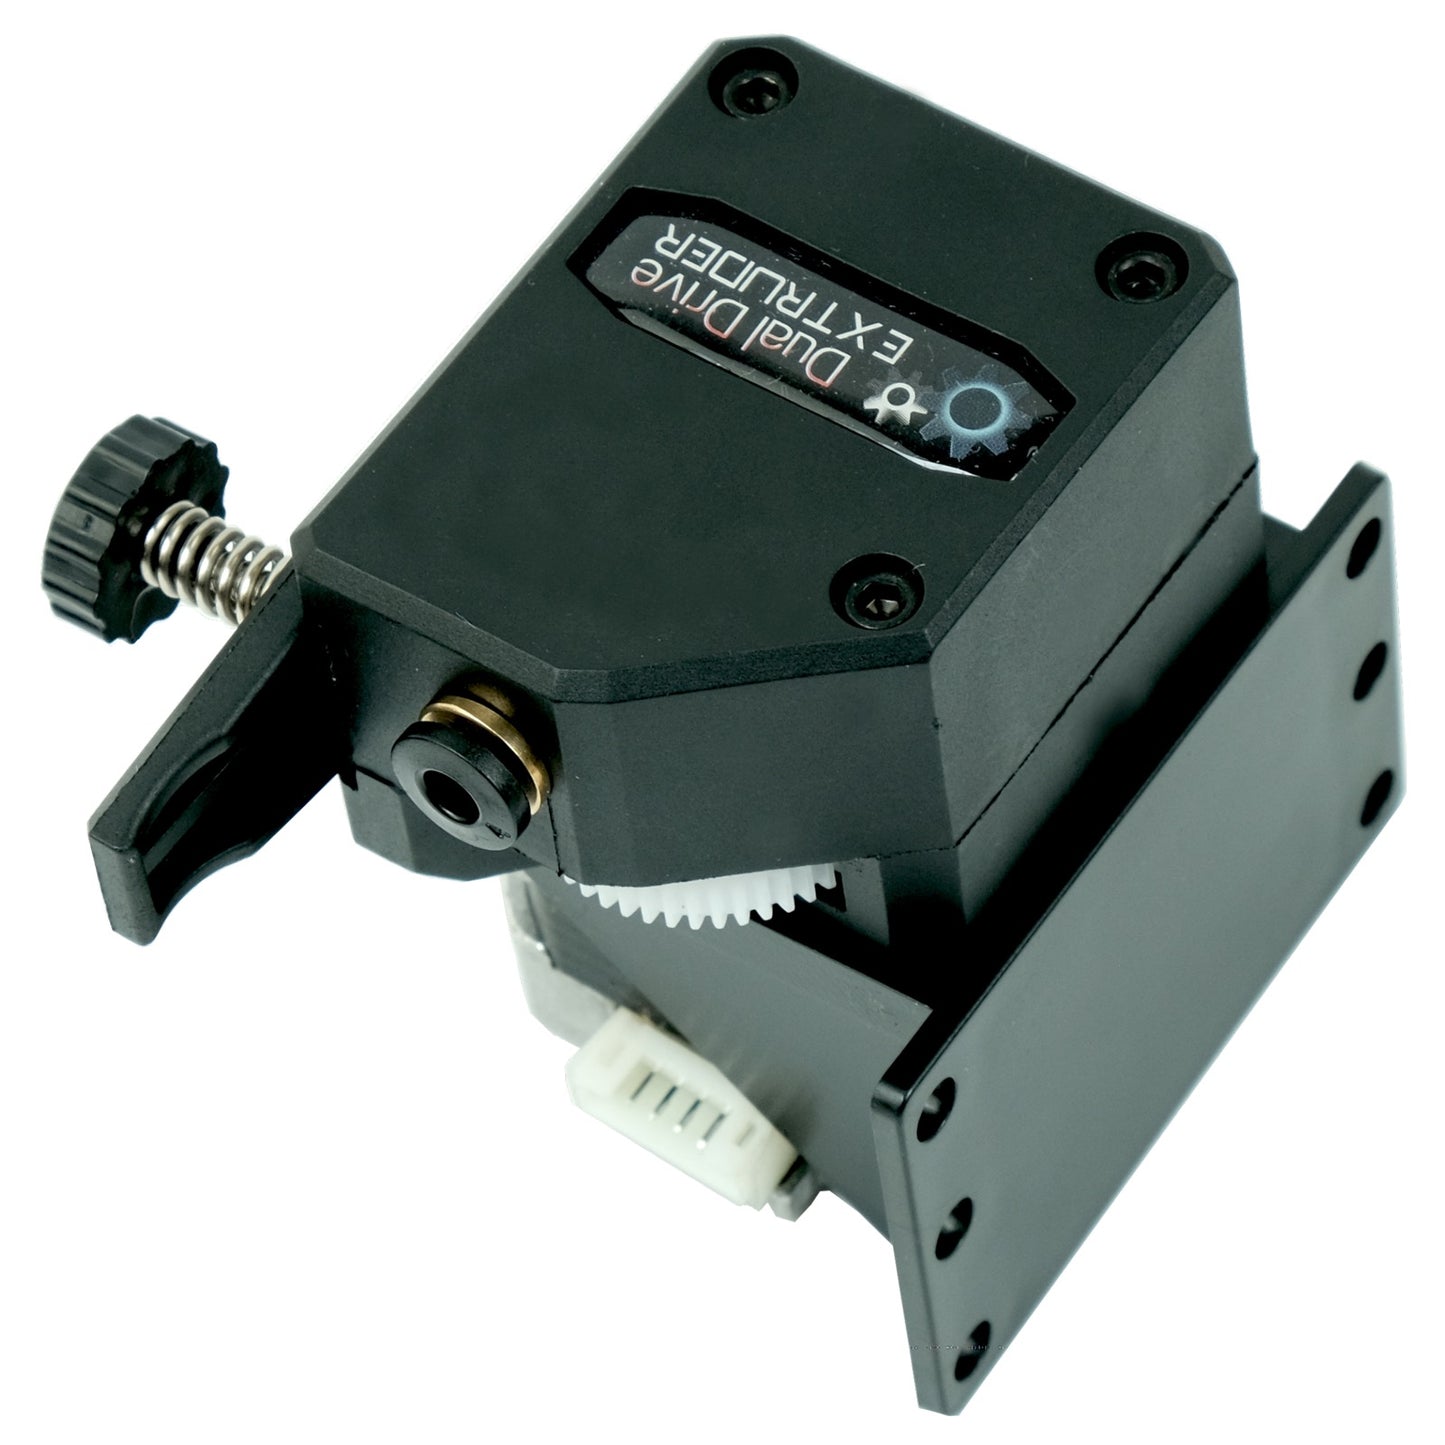 BMG Extruder, Dual Drive Bowden Extruder for 3D Printers and 1.75mm Filament